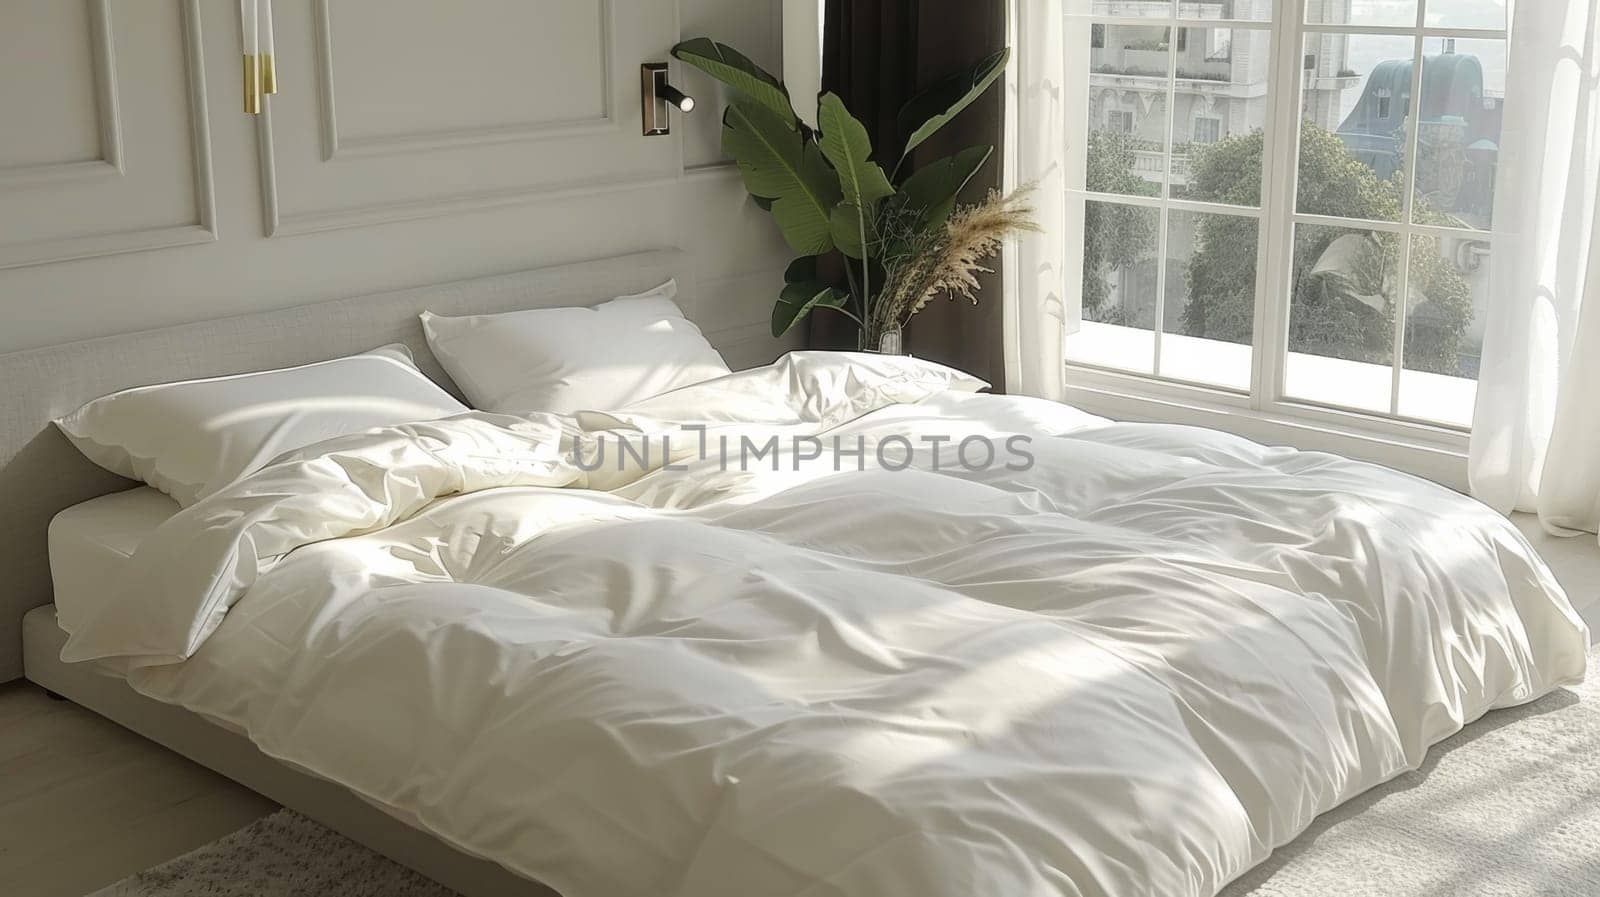 A bed with white sheets and pillows in a bedroom